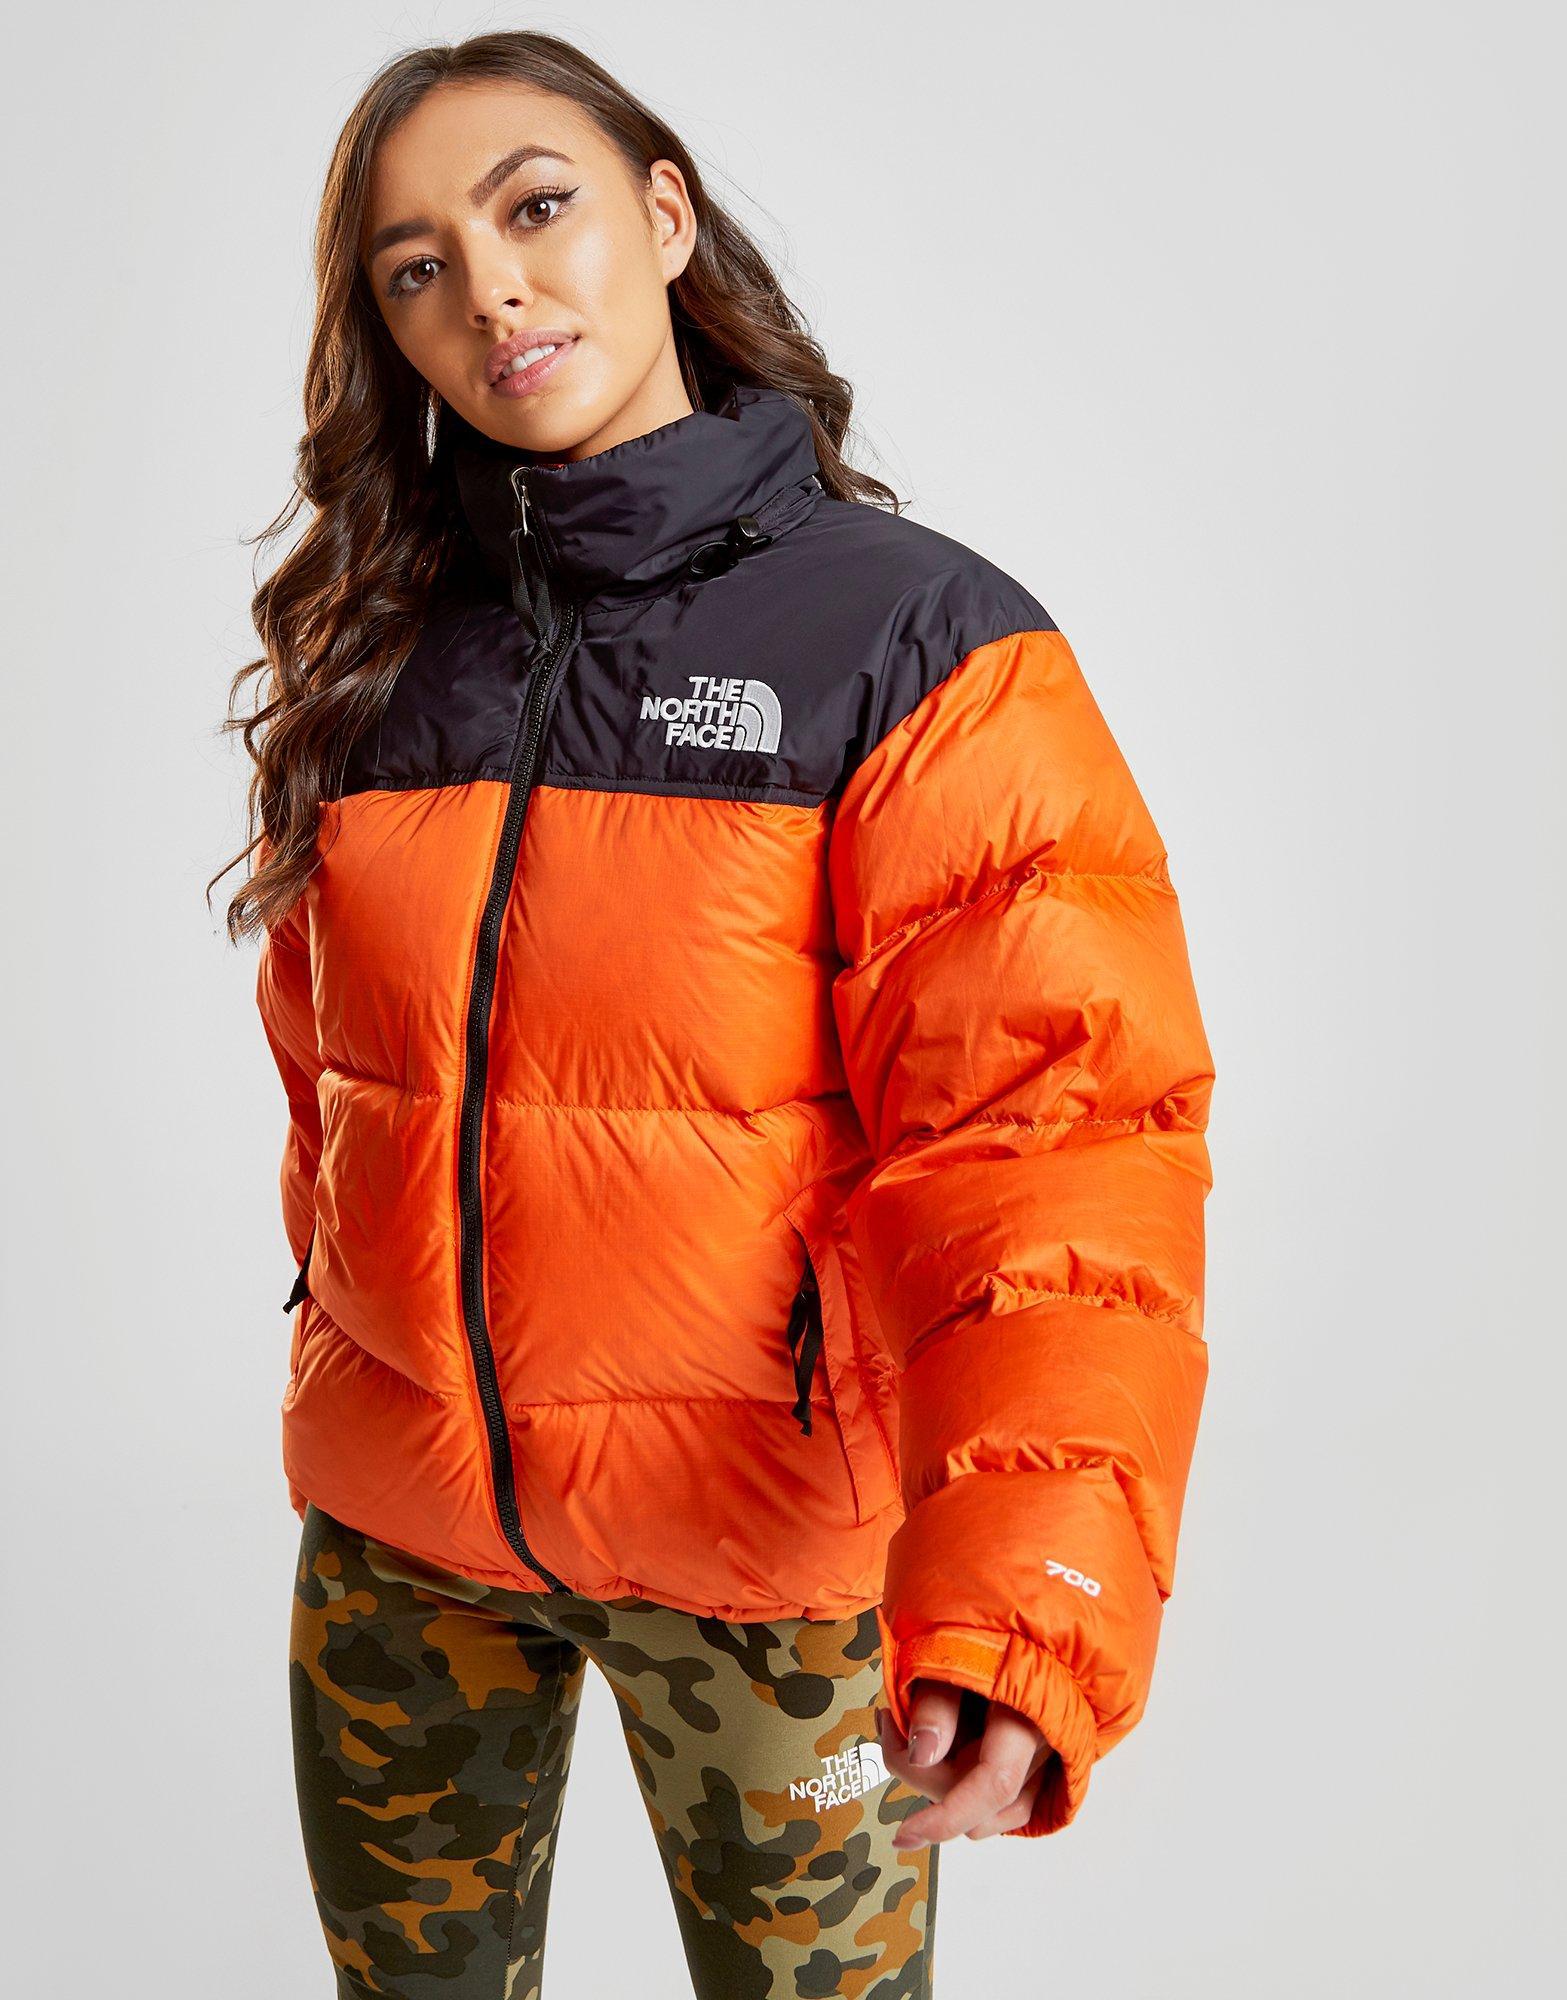 the north face puffer jacket orange